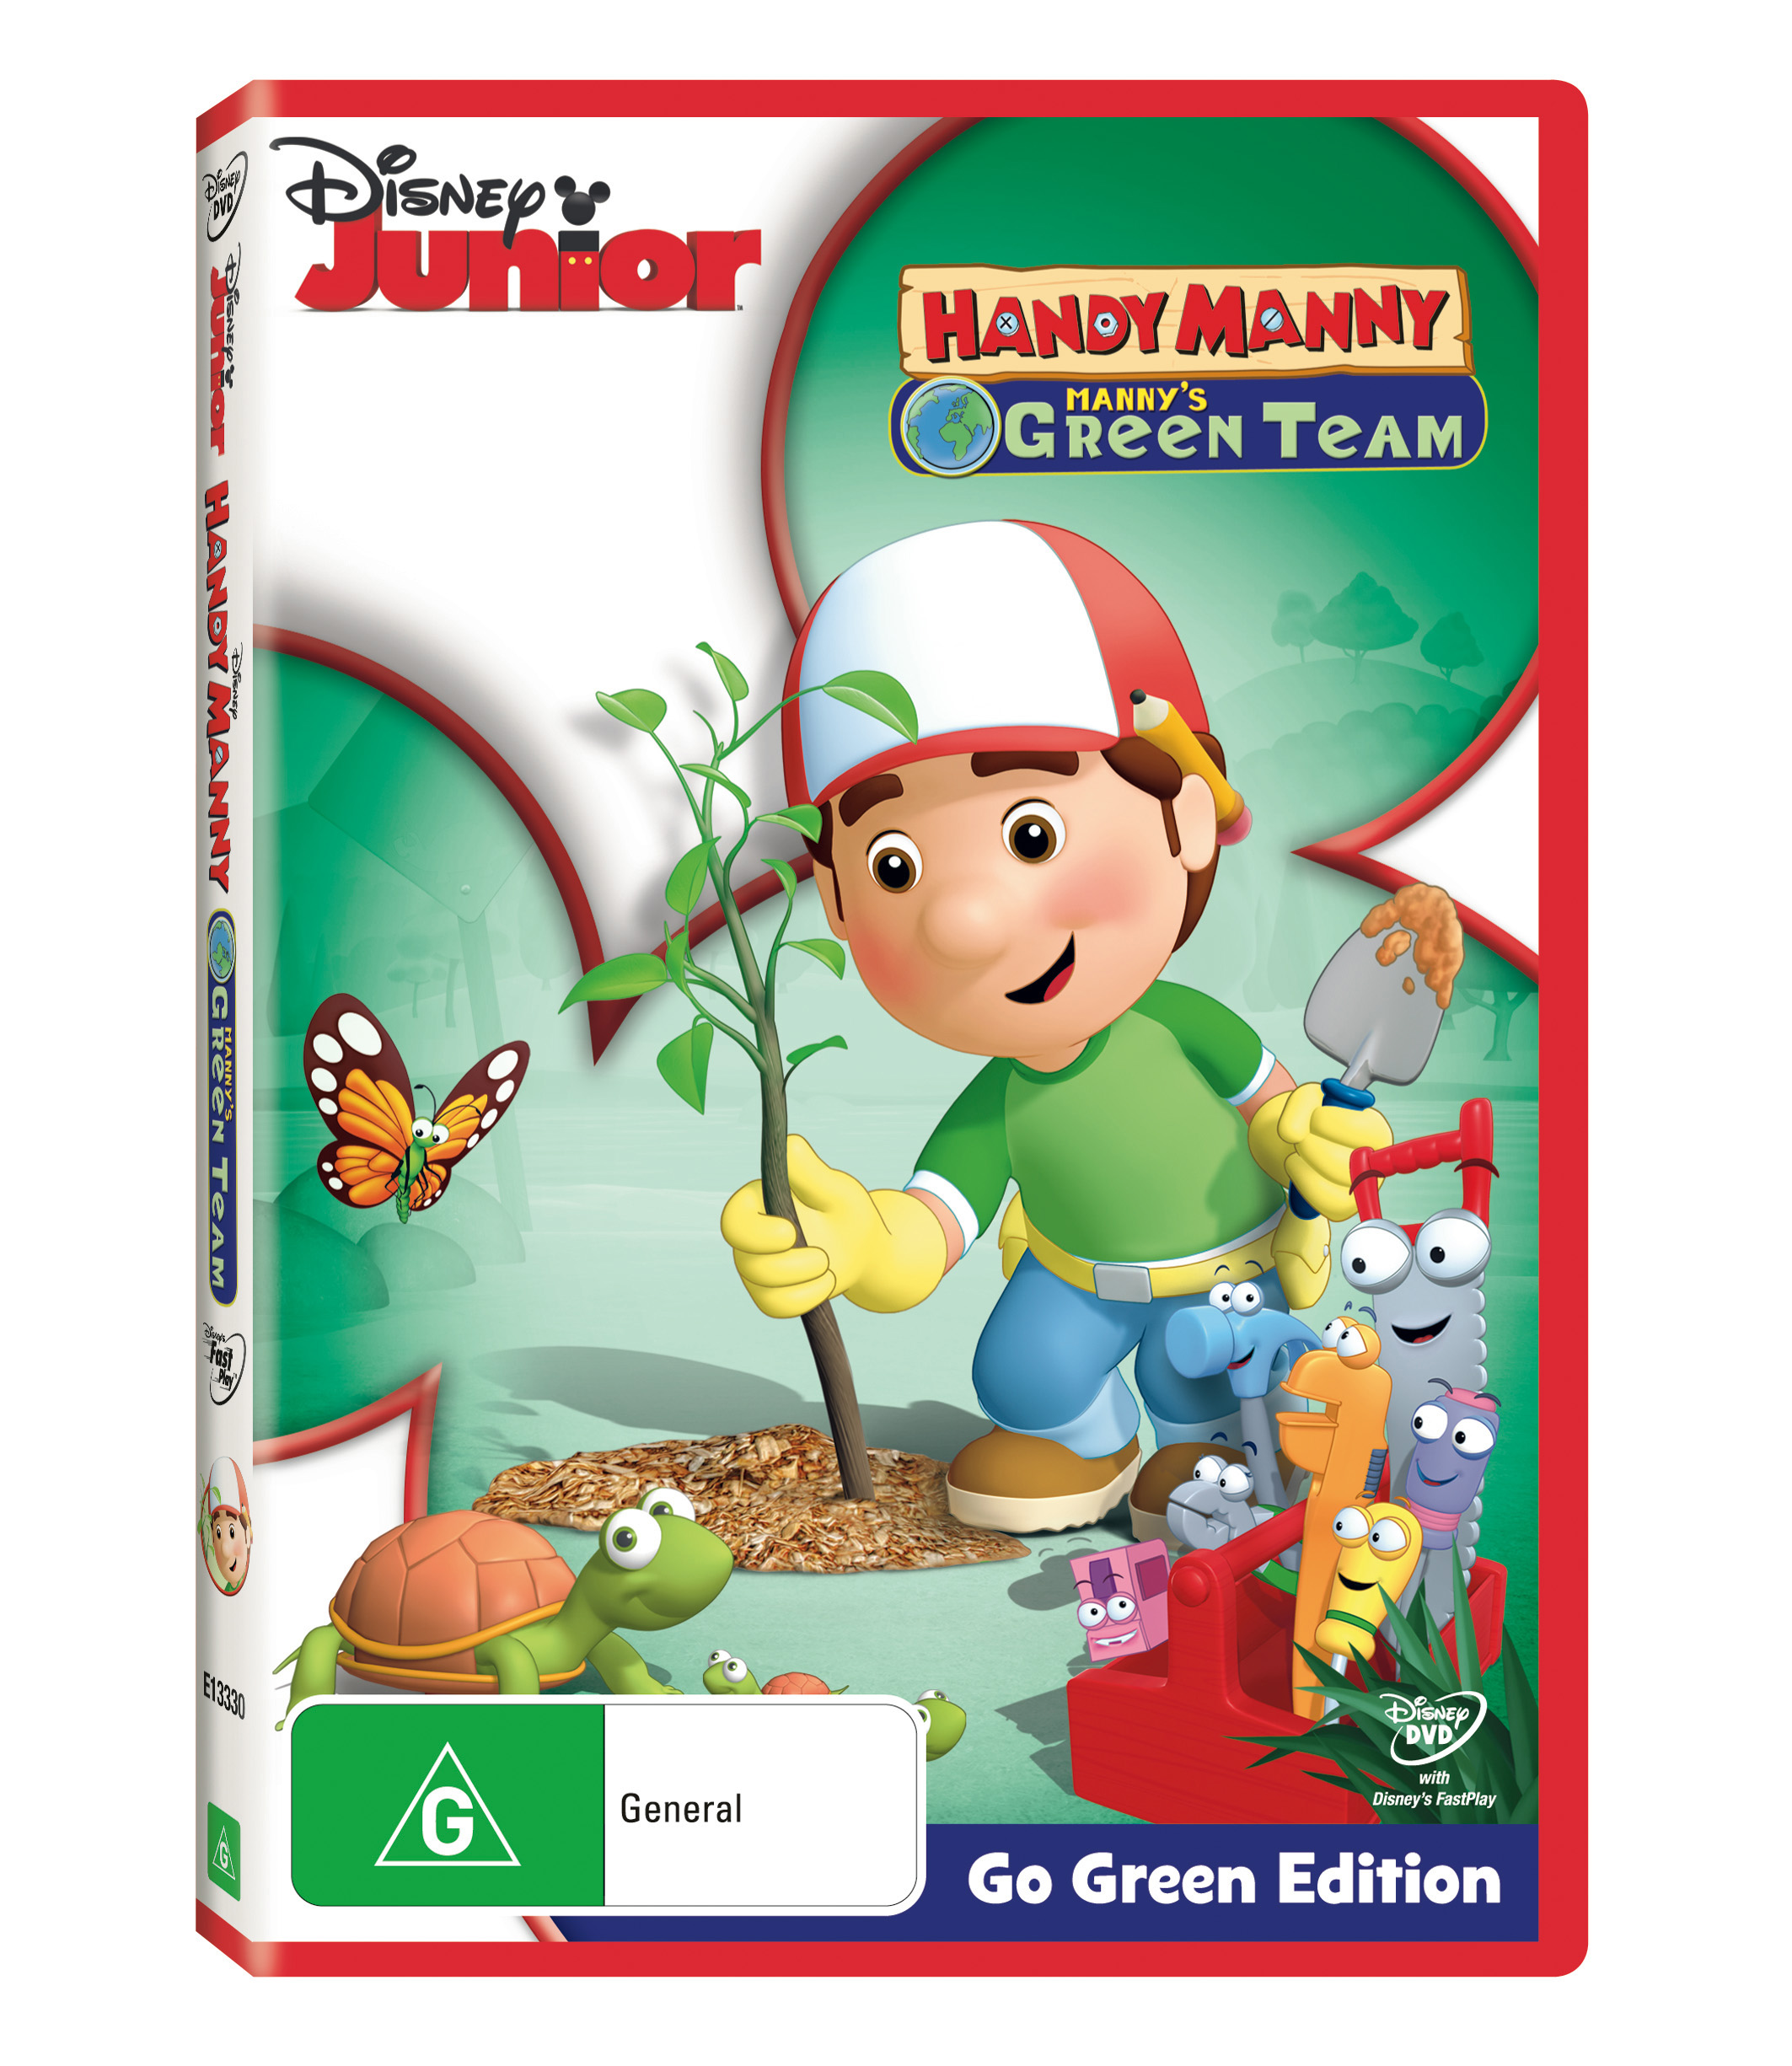 For those who may not know this character, Handy Manny is kind of like the Spanish...